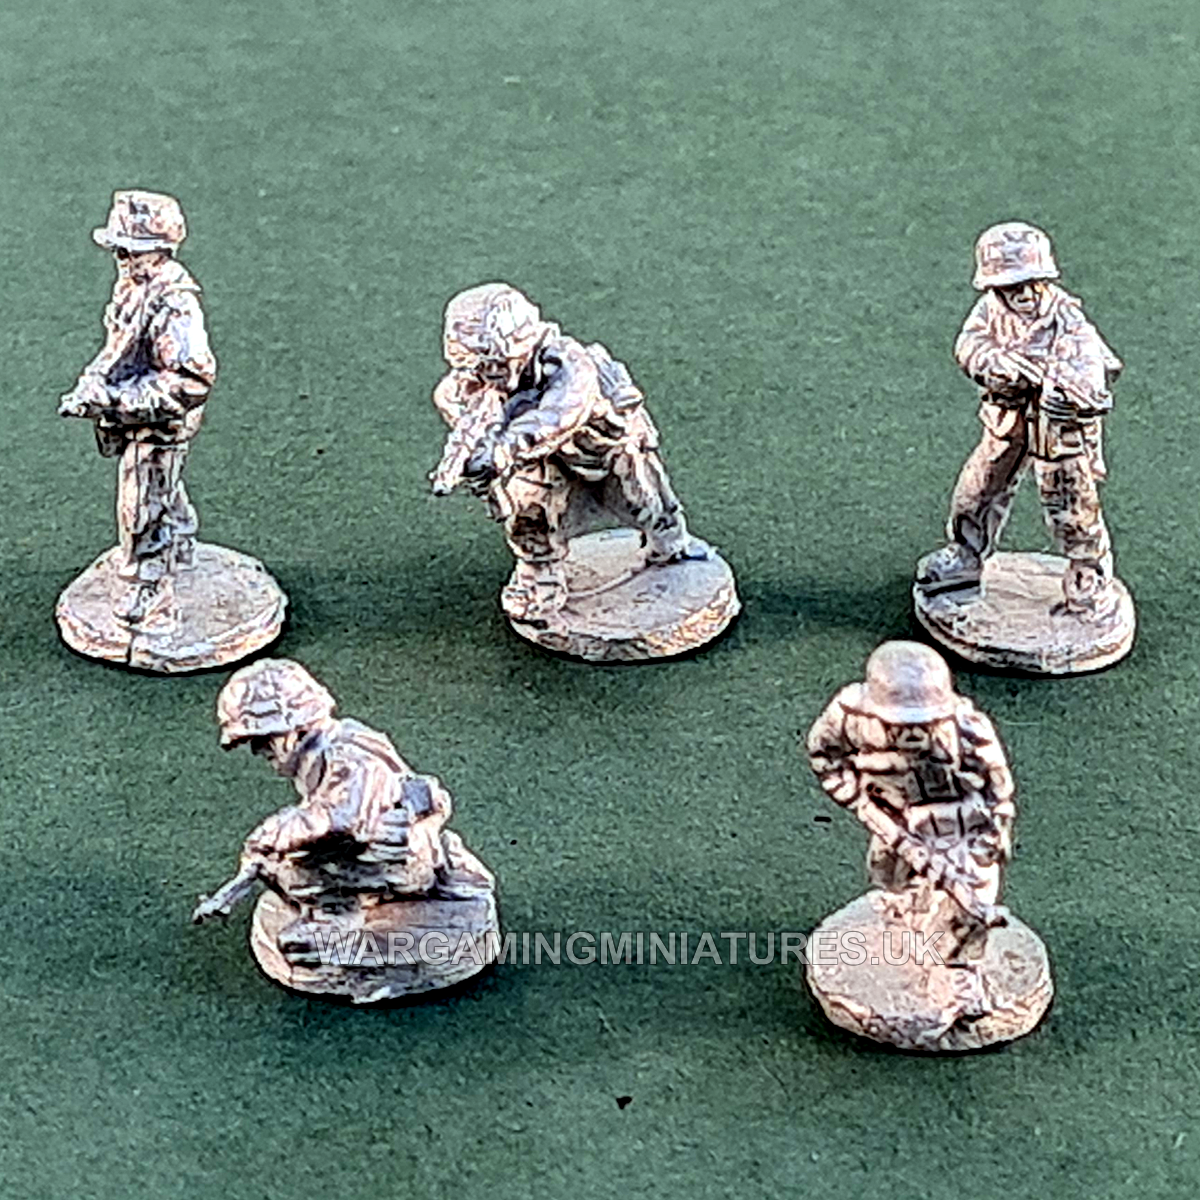 GW02 Germans with SMG's unpainted